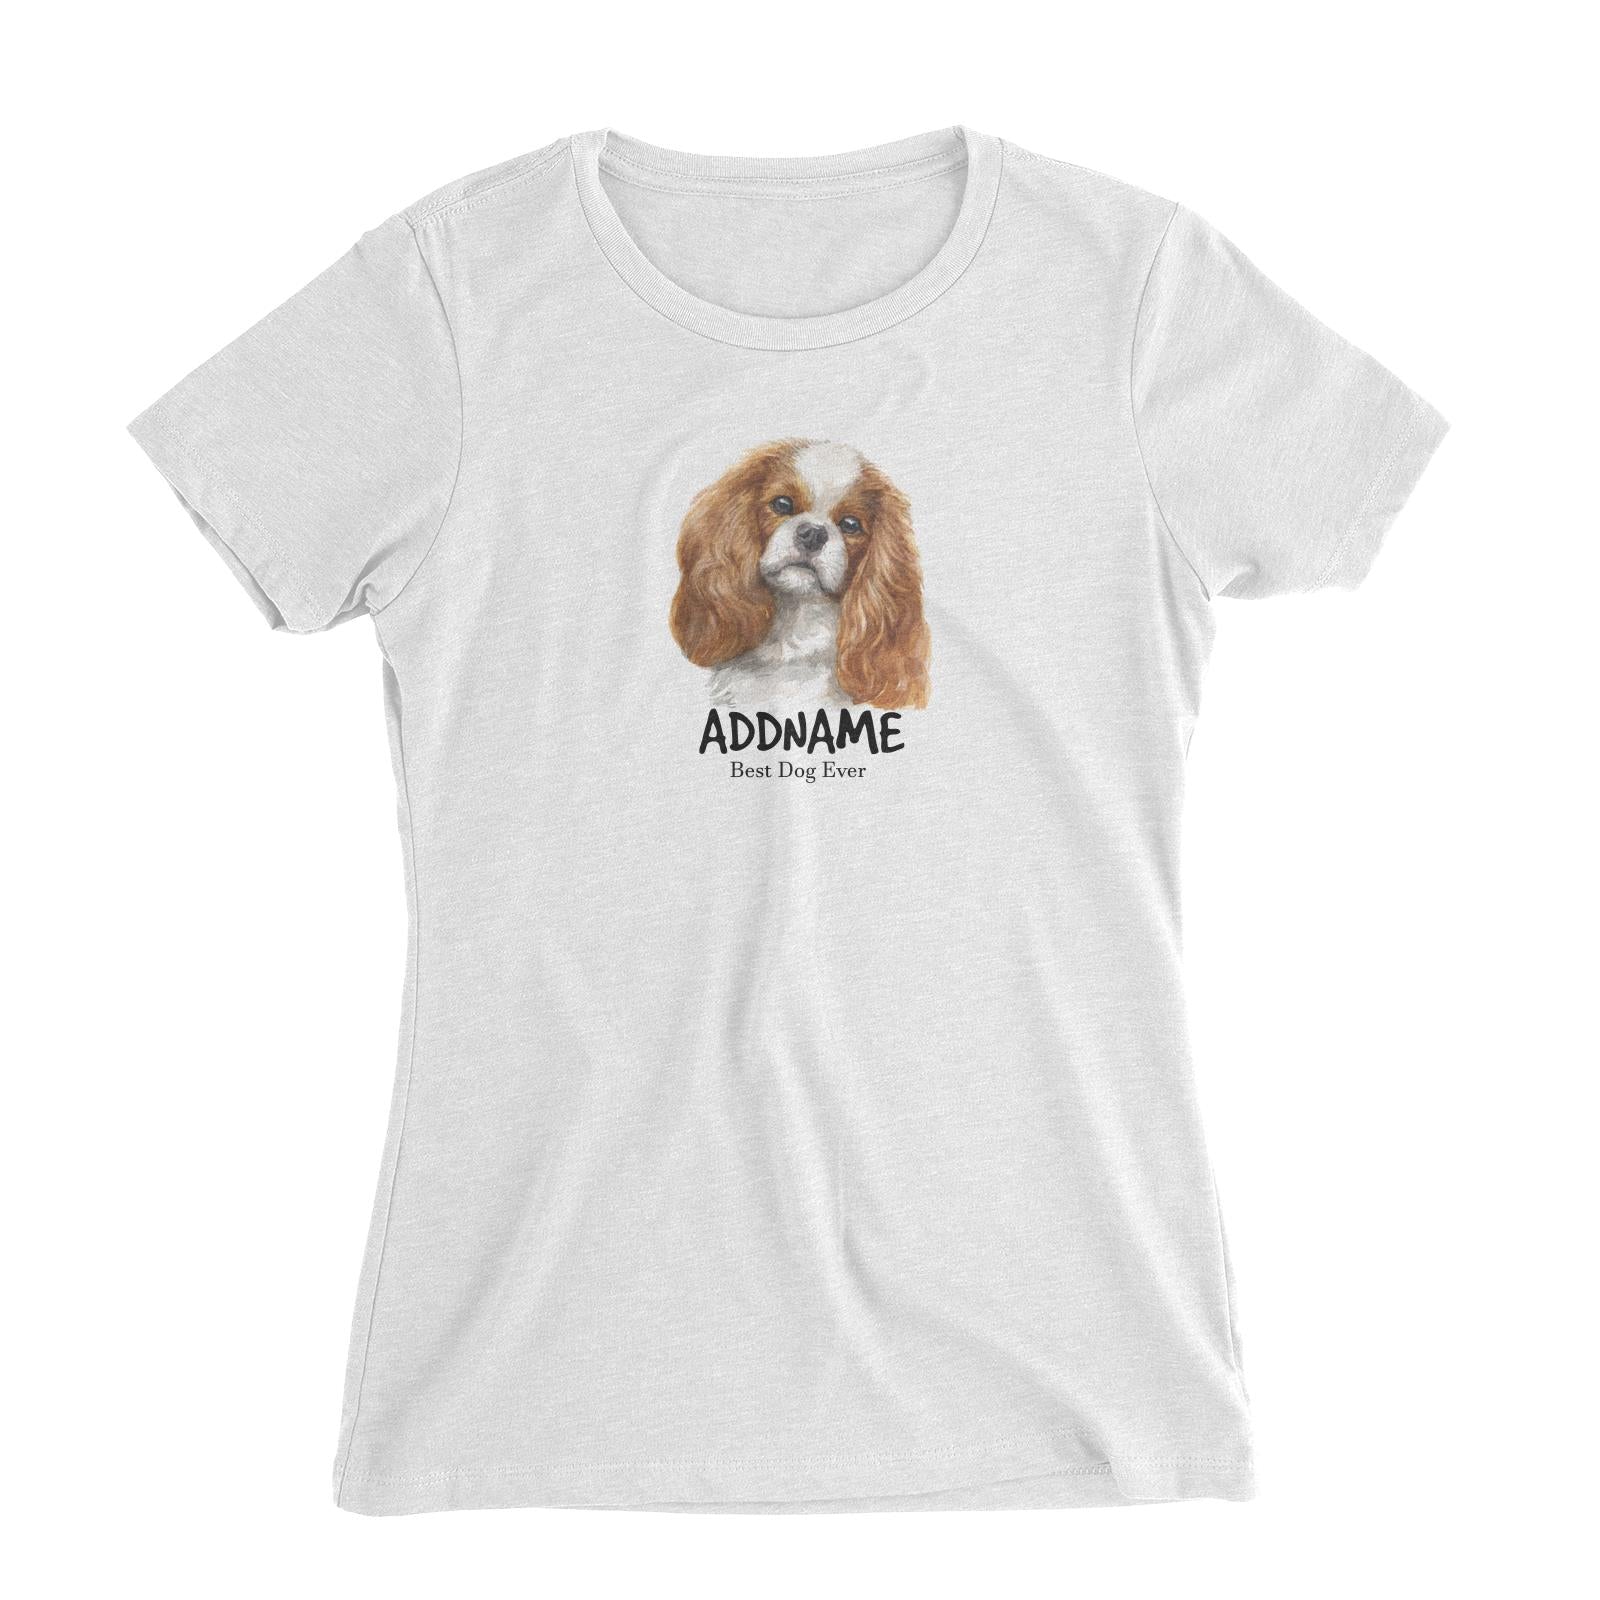 Watercolor Dog King Charles Spaniel Best Dog Ever Addname Women's Slim Fit T-Shirt